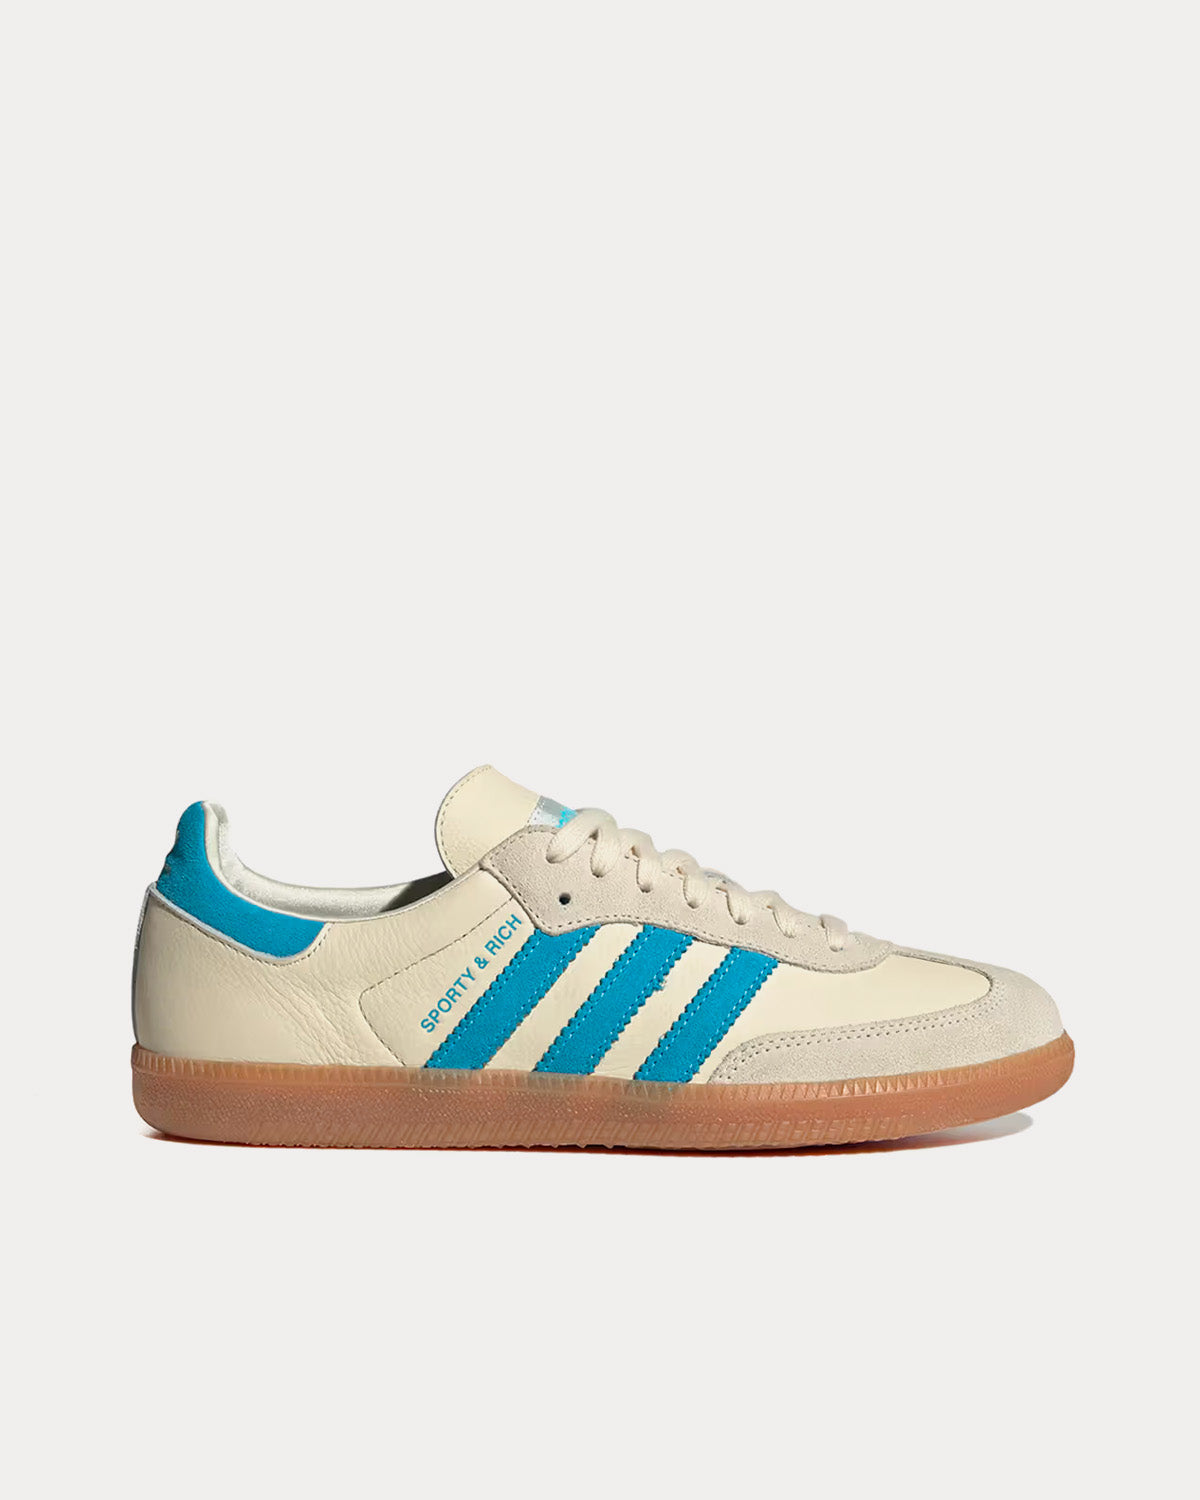 Adidas x Sporty & Rich - Samba Off-White / Blue Low Top Sneakers